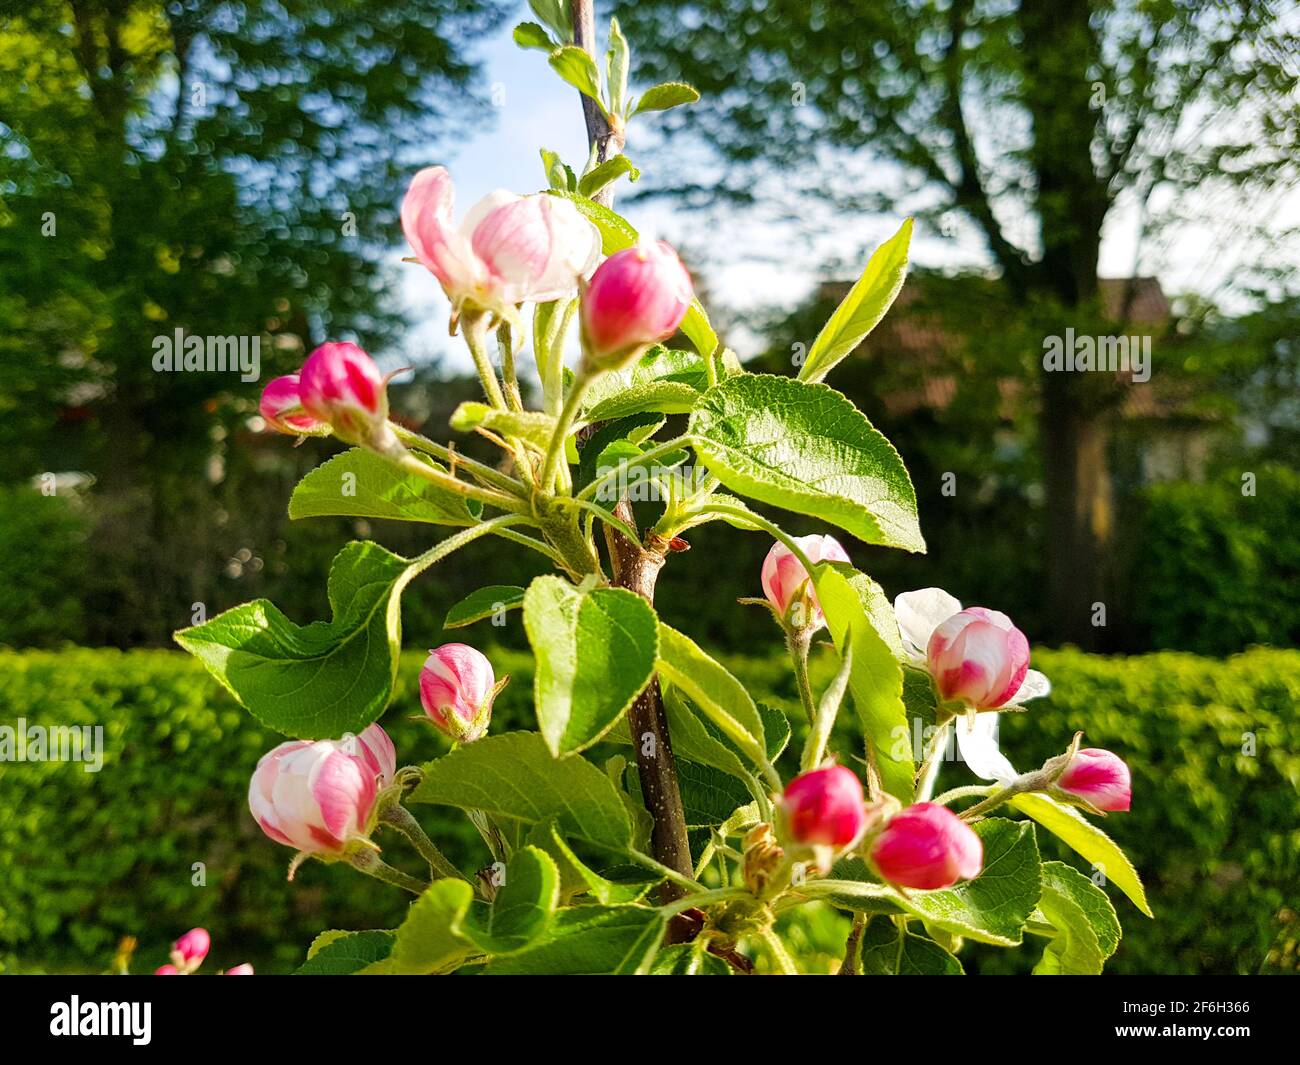 Apple blossom apple tree espalier fruit in spring in front of sky blue and tall trees garden park landscape blossoms pink white beauty buds floral Stock Photo